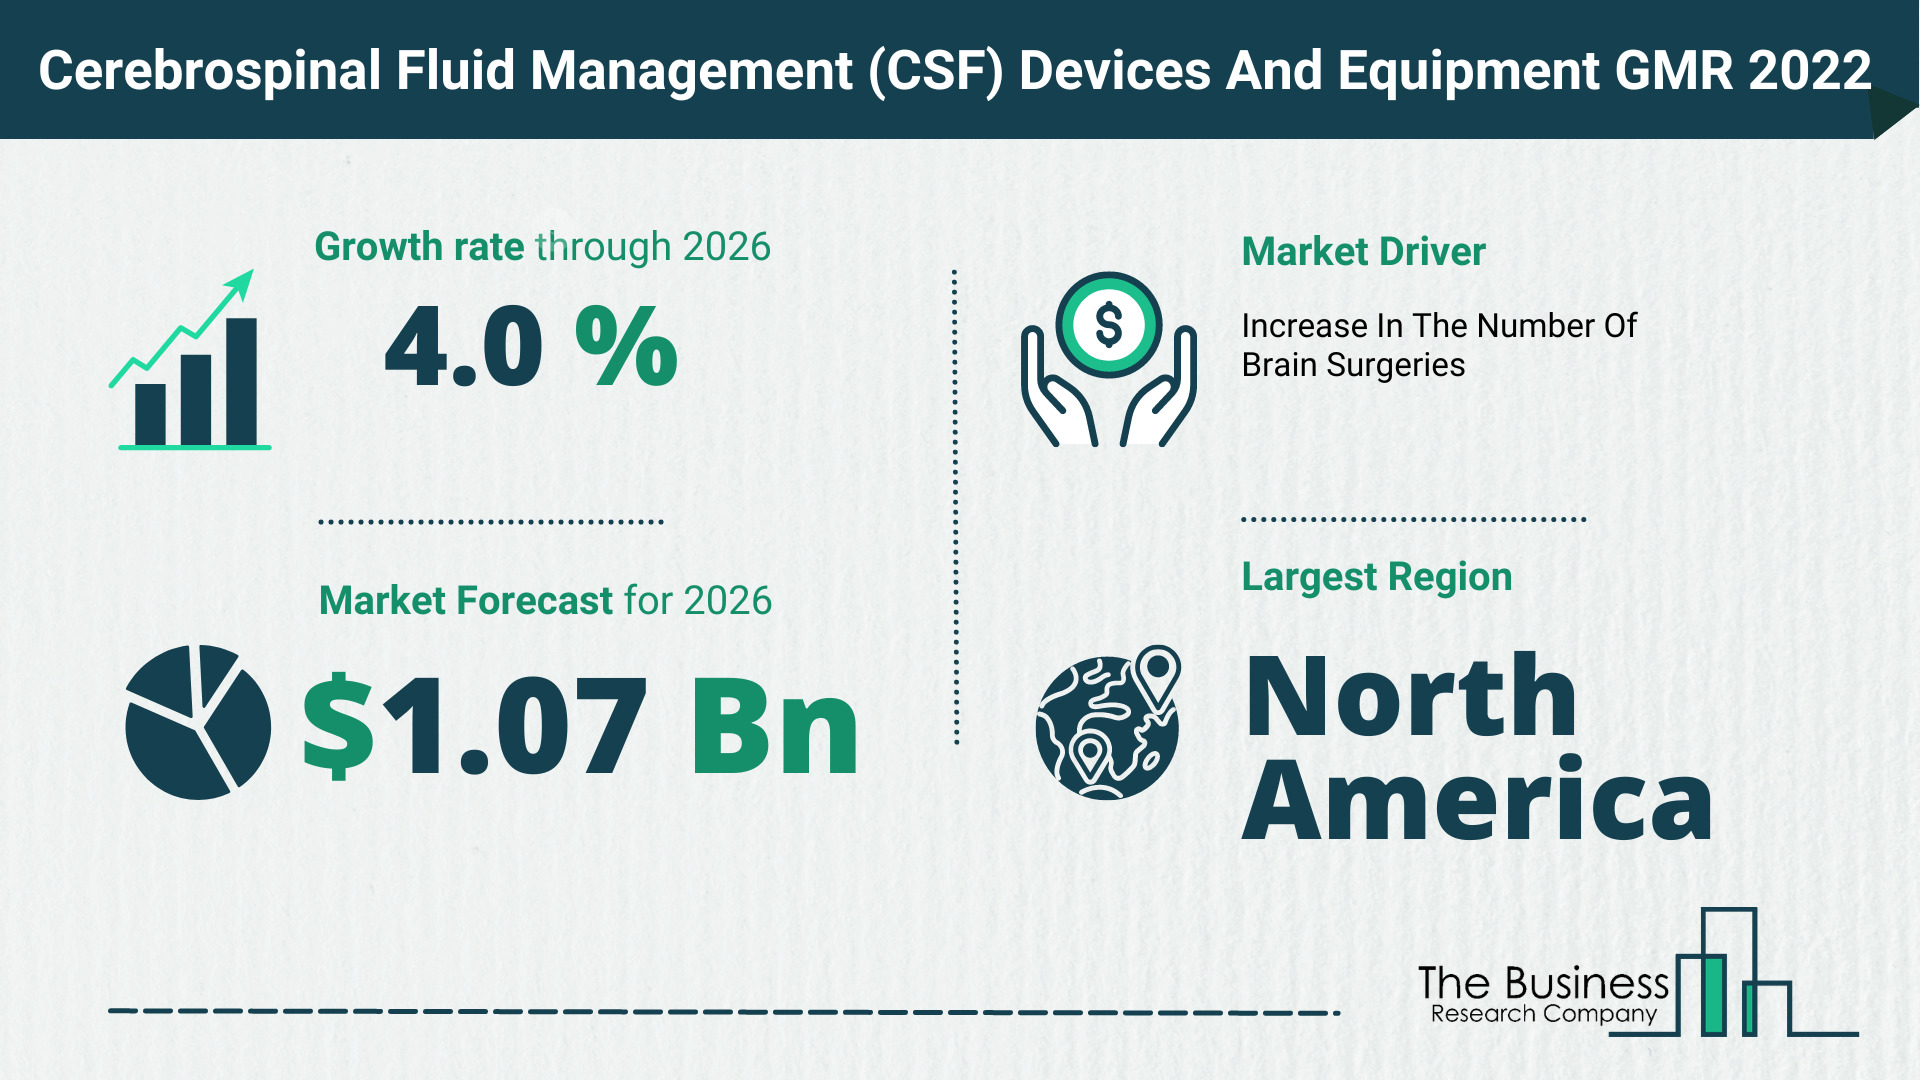 Latest Cerebrospinal Fluid Management (CSF) Devices And Equipment Market Growth Study 2022-2026 By The Business Research Company